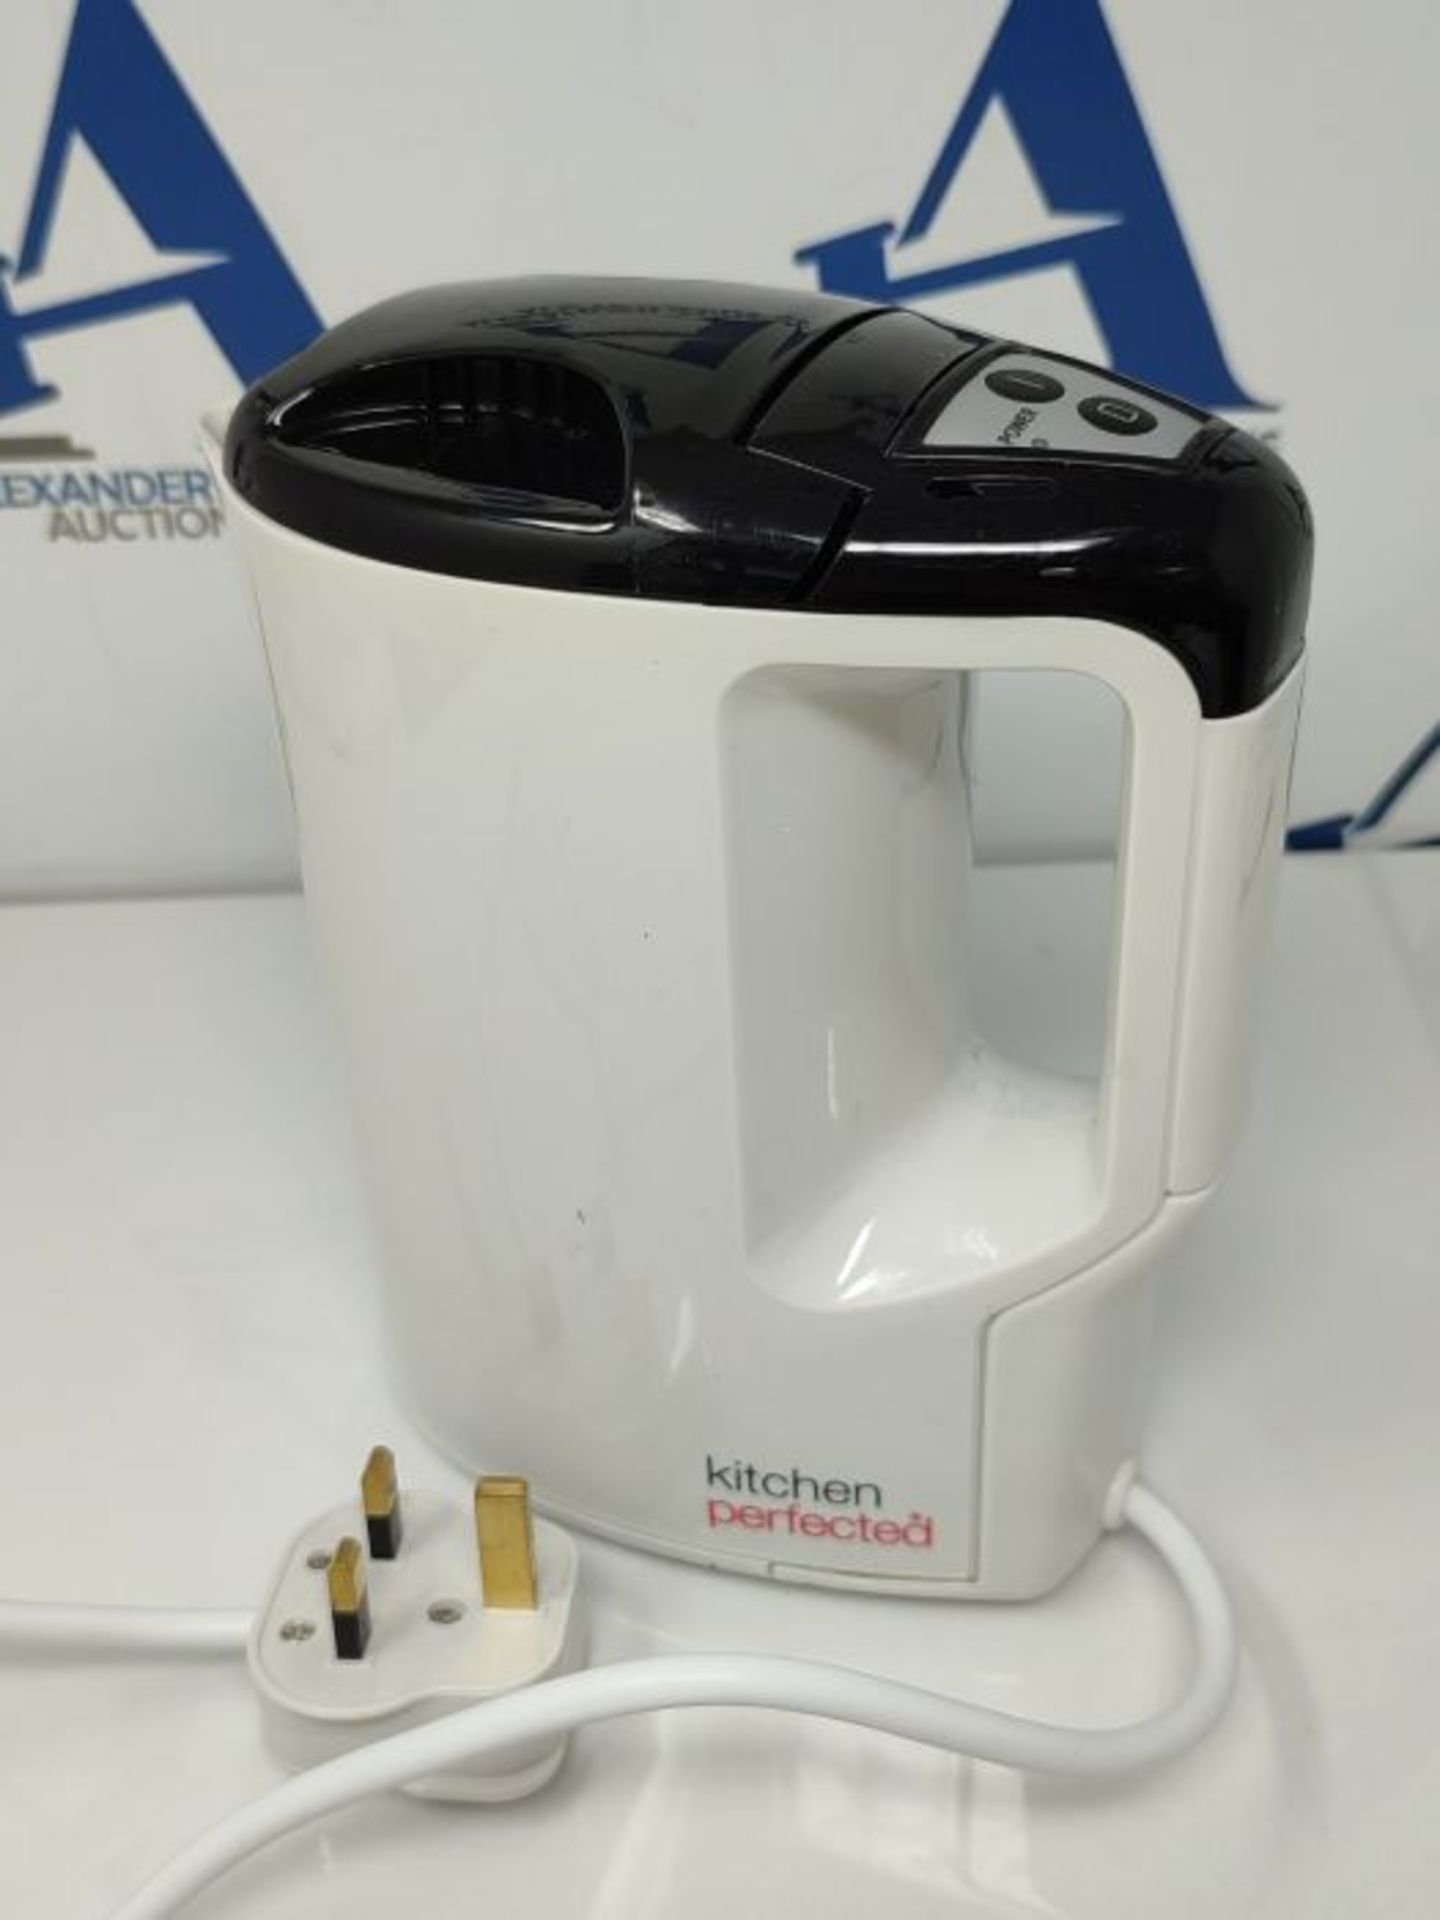 KitchenPerfected 1000w 0.9Ltr Corded Lightweight Travel Kettle with 2 cups - Cream - E - Image 3 of 3